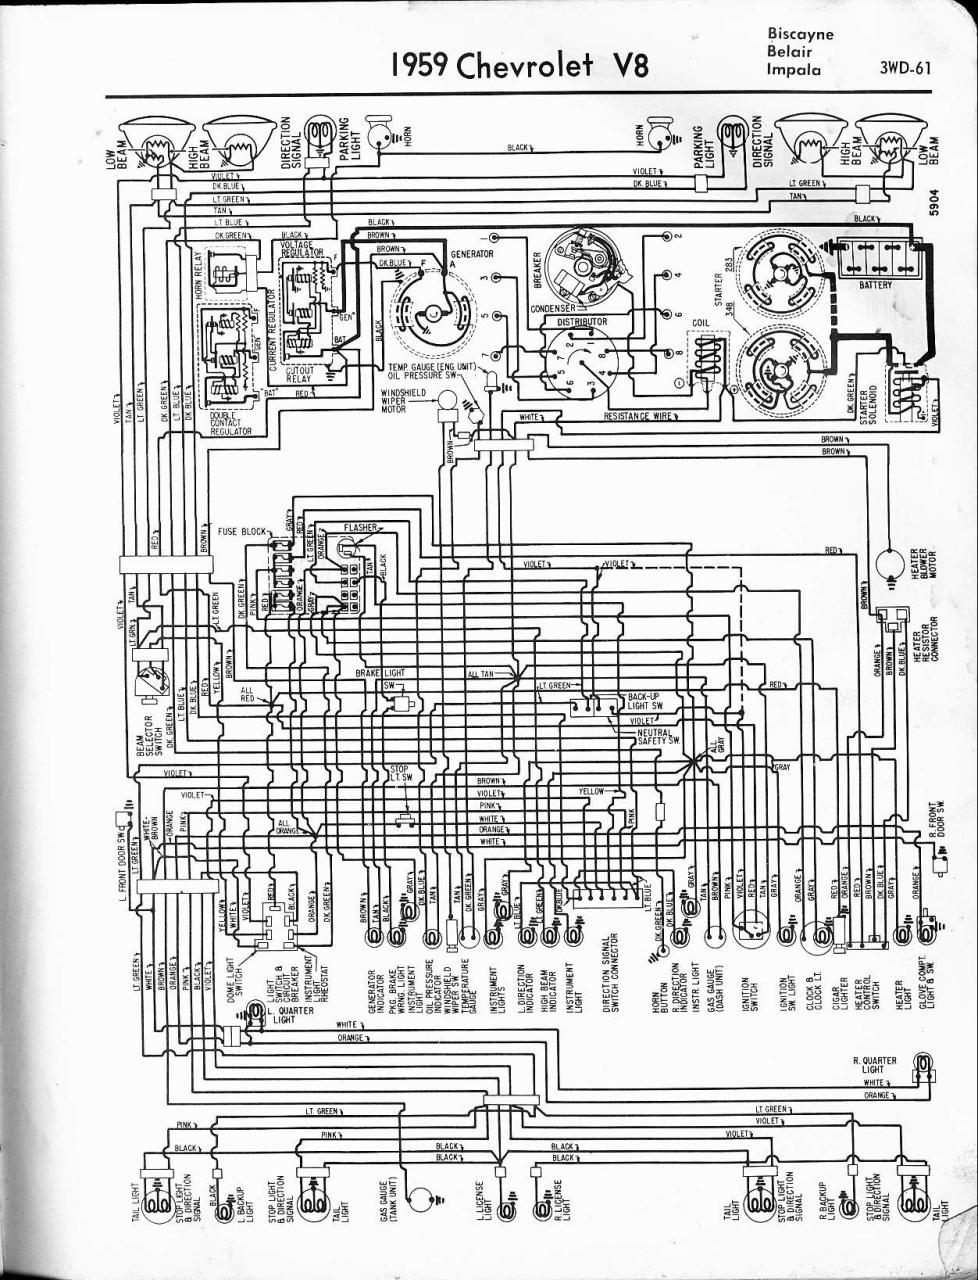 1968 Chevy C10 Ignition Switch Wiring Diagram 1968 Chevy Truck Wiring